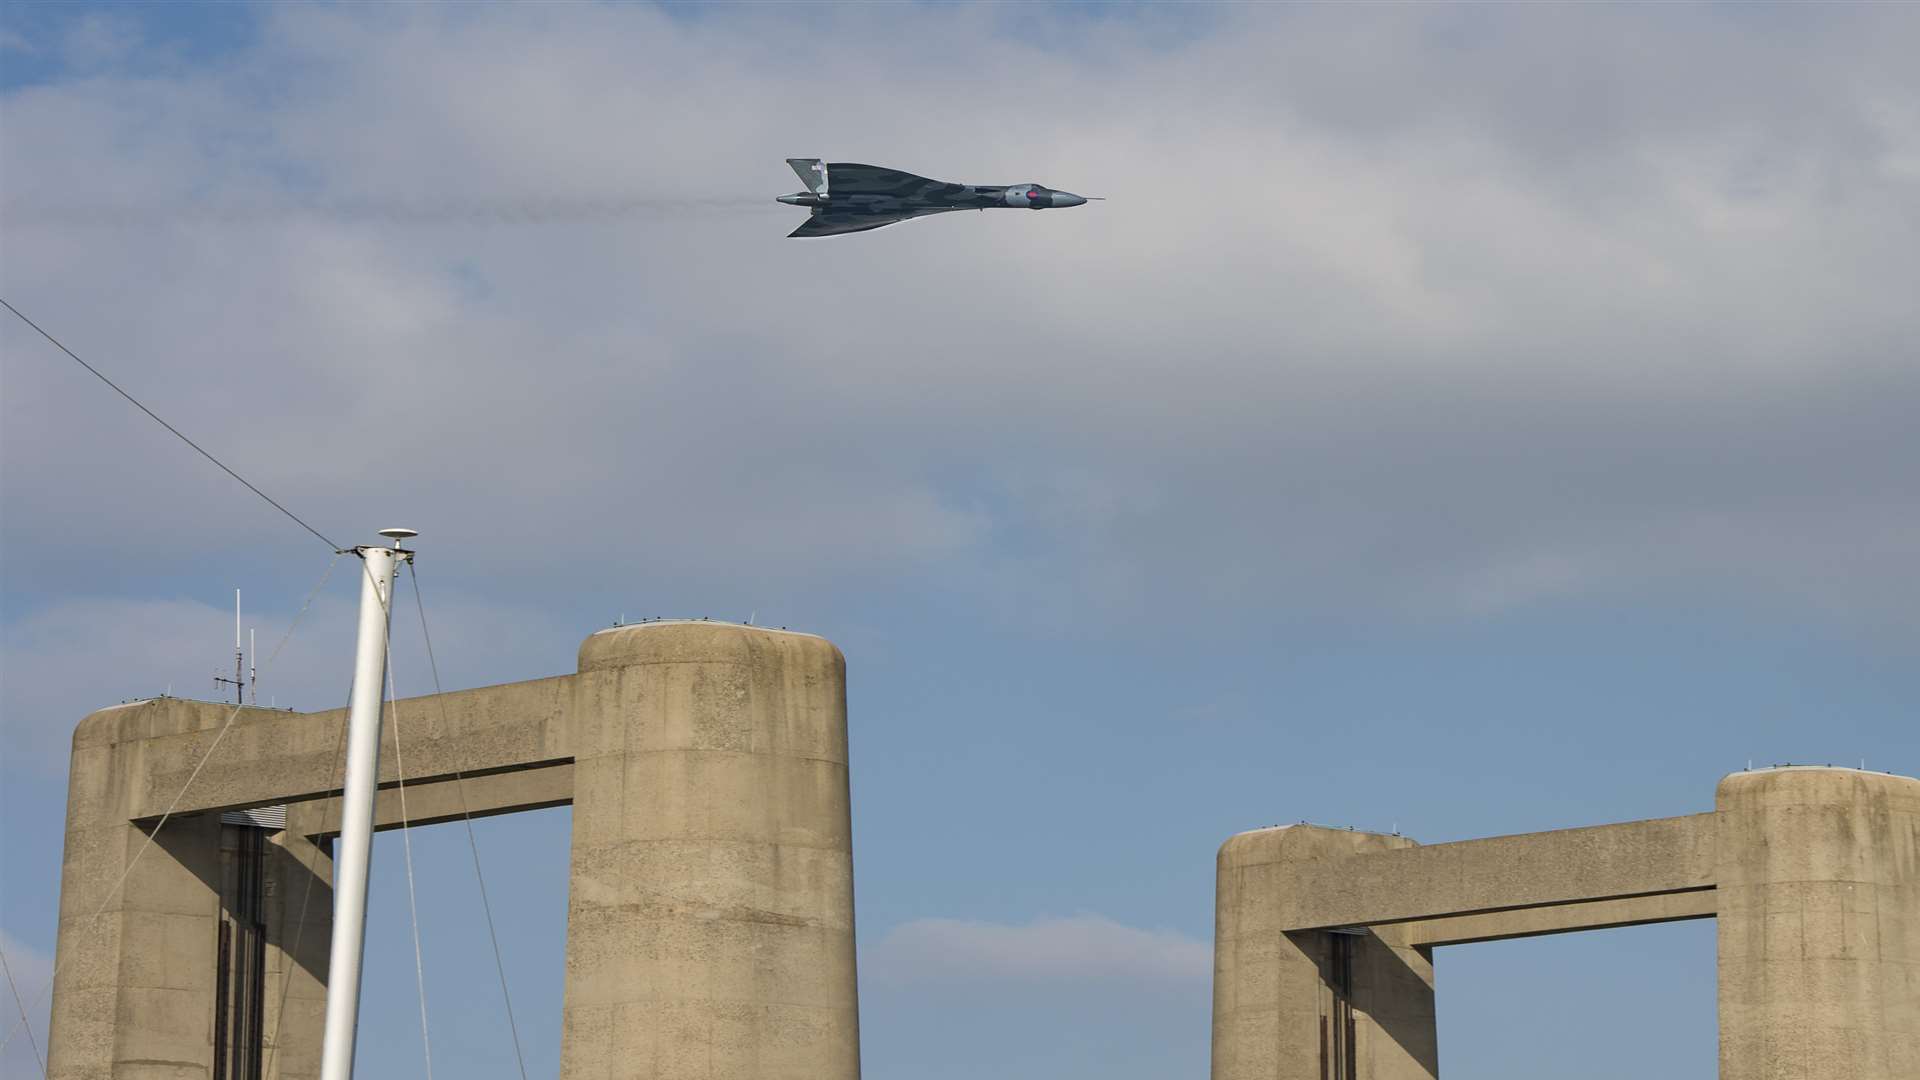 Vulcan XH588 flies over the Kingsferry Bridge on the Isle of Sheppey. Picture: Andy Payton.